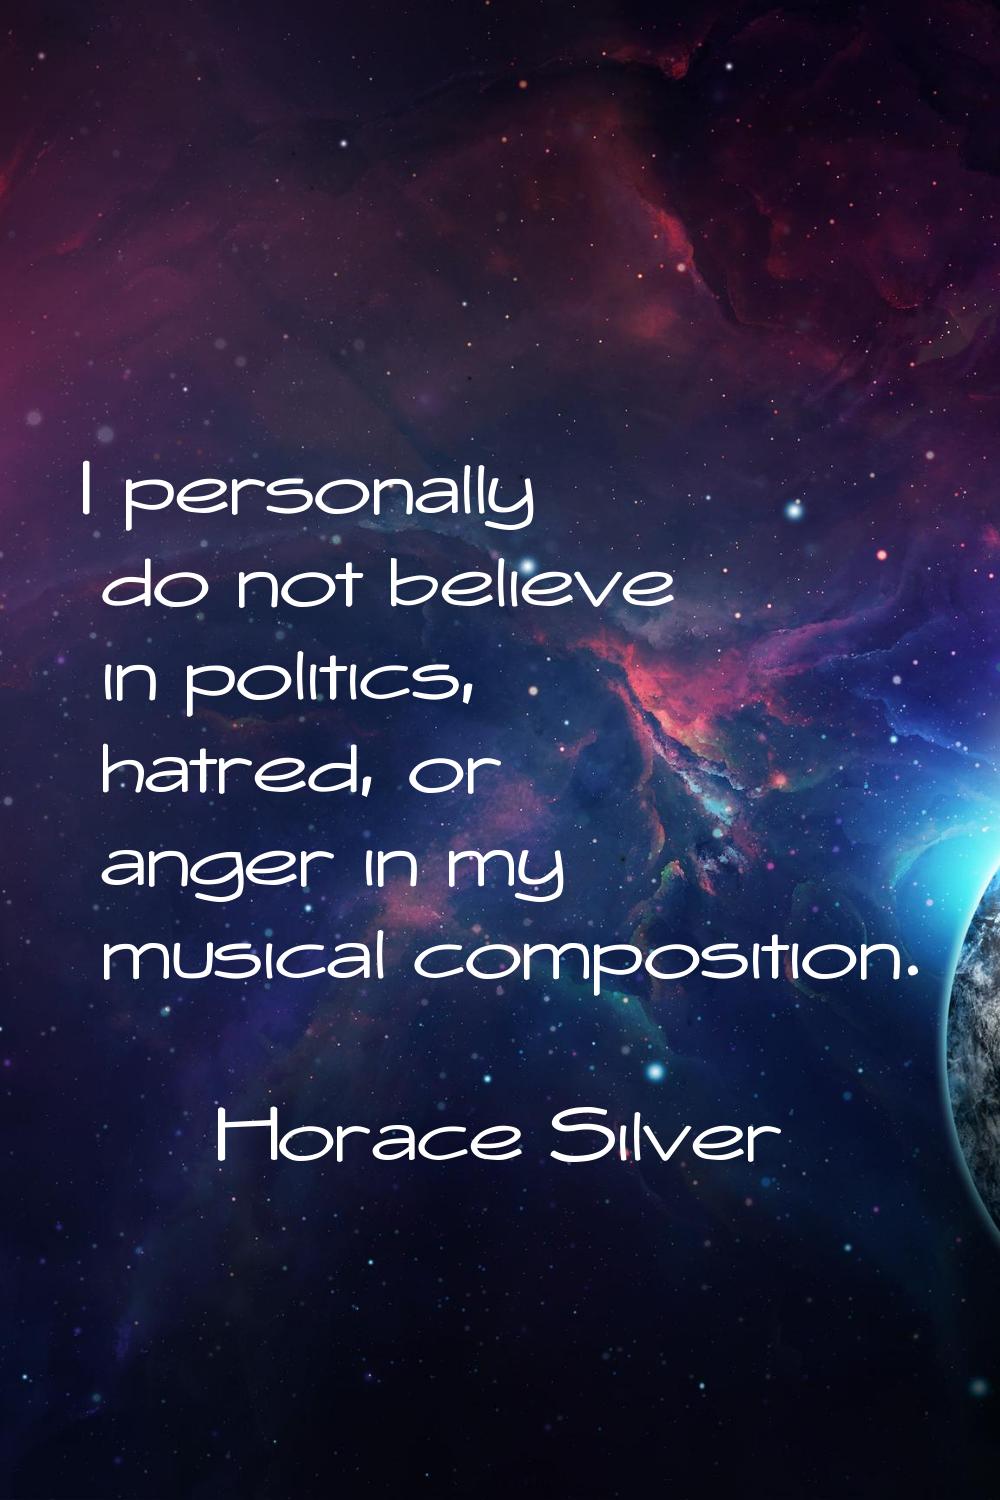 I personally do not believe in politics, hatred, or anger in my musical composition.